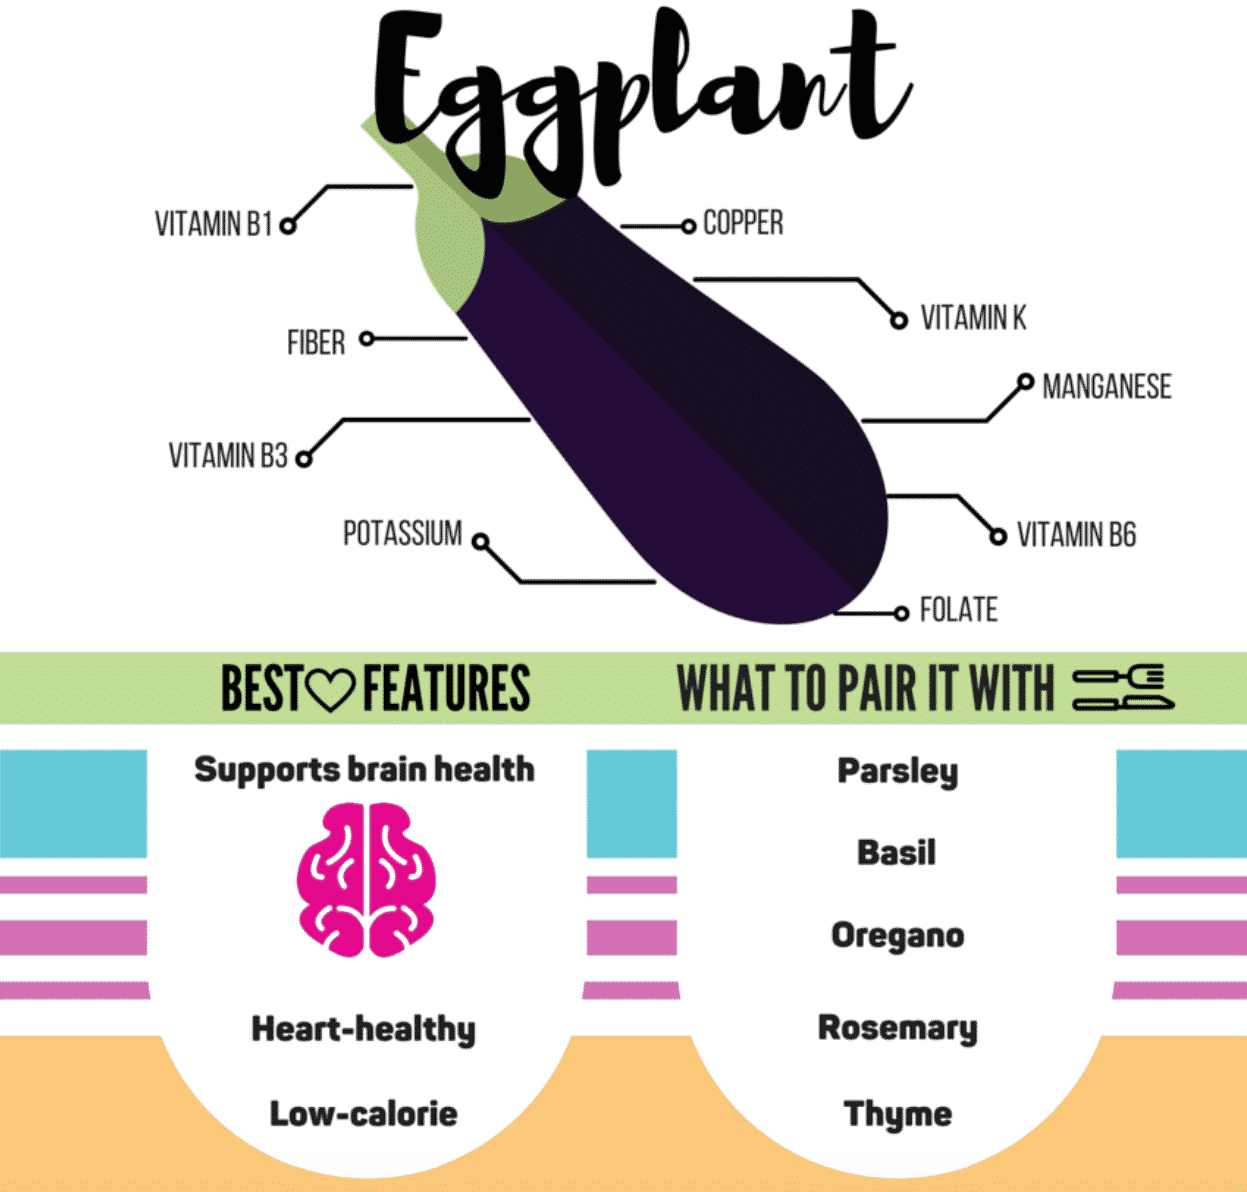 From improving your memory to helping with weight loss, eggplants have so many health benefits! Try these recipes and tricks to include them in your diet.